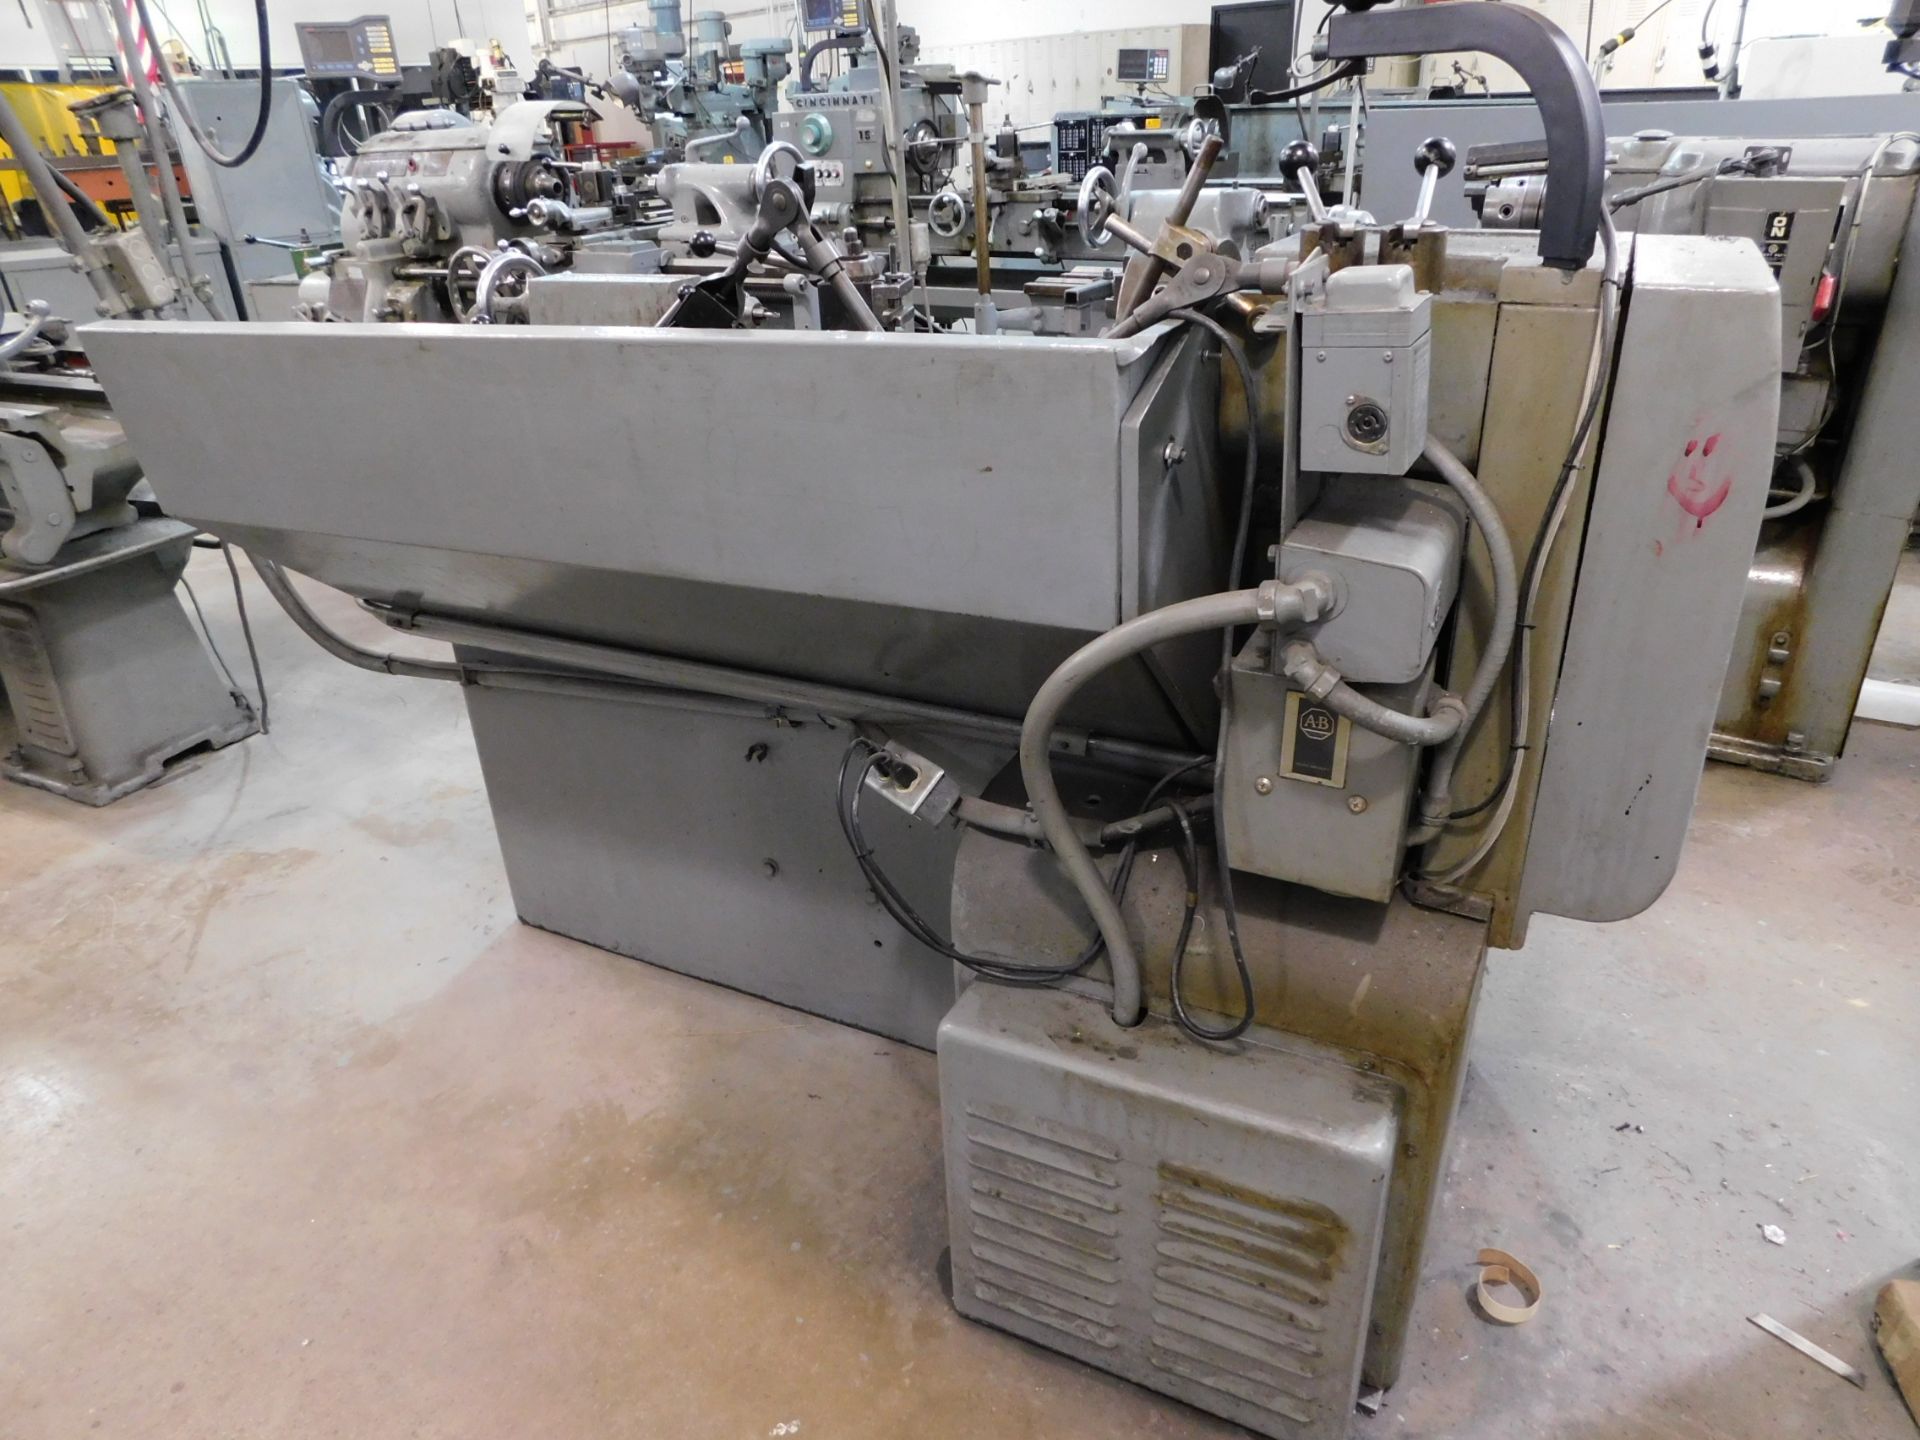 Clausing Colchester 13" x 36" Toolroom Lathe, SN F3/73188, with Anilam Wizard 411 2-Axis Digital - Image 10 of 11